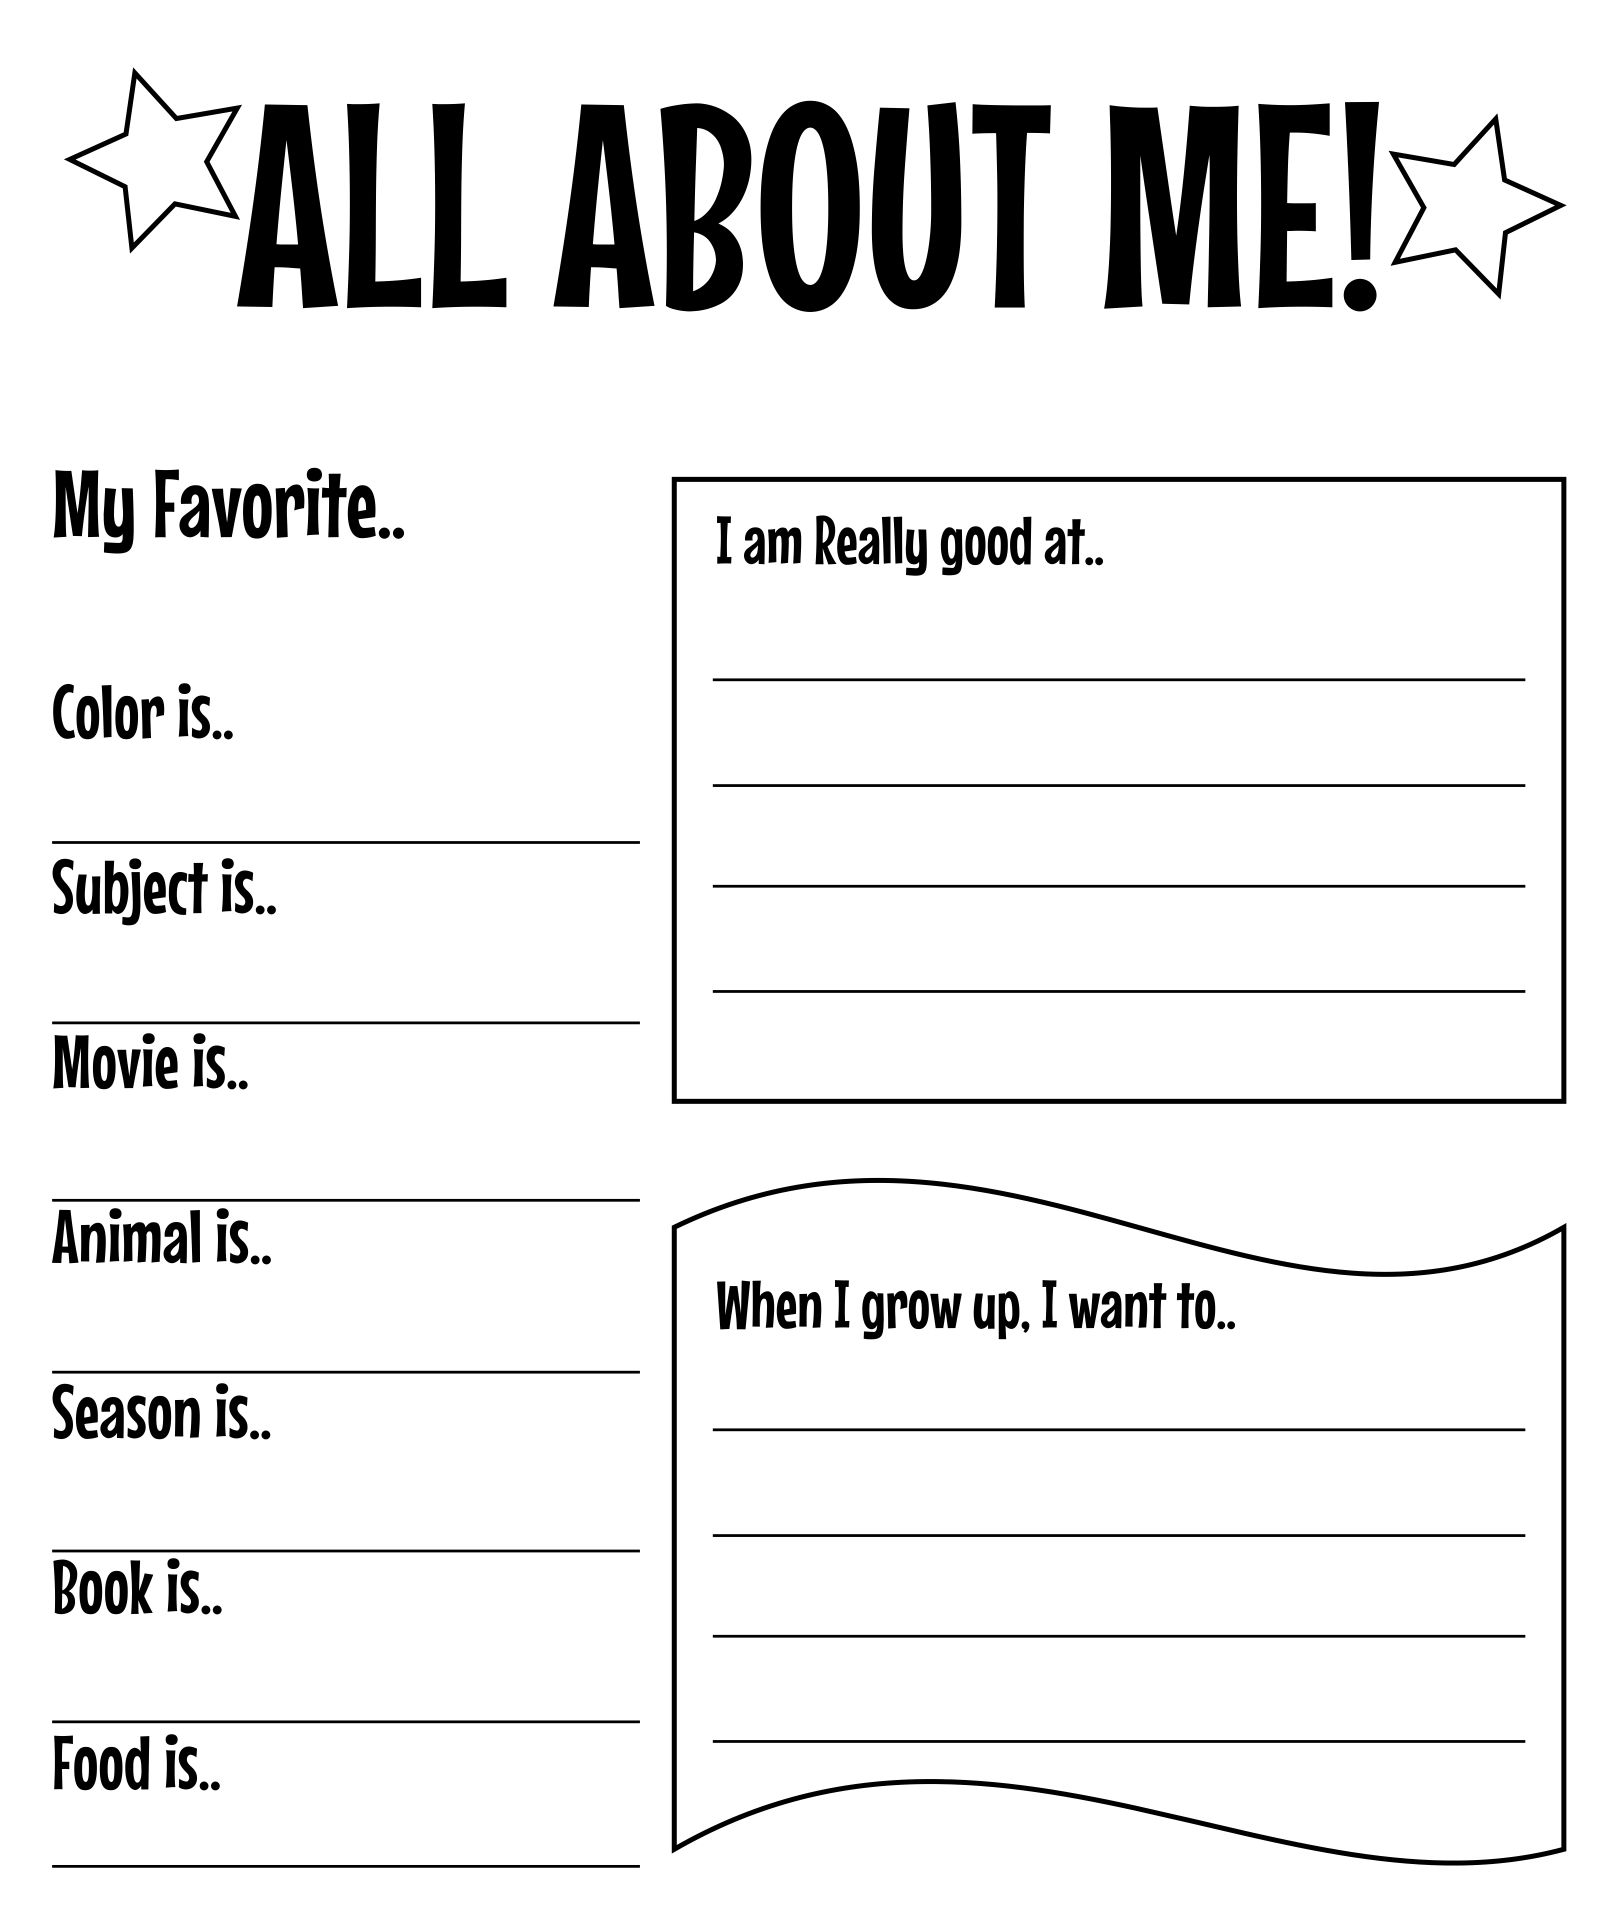 All About Me Worksheet Free Pdf Middle School